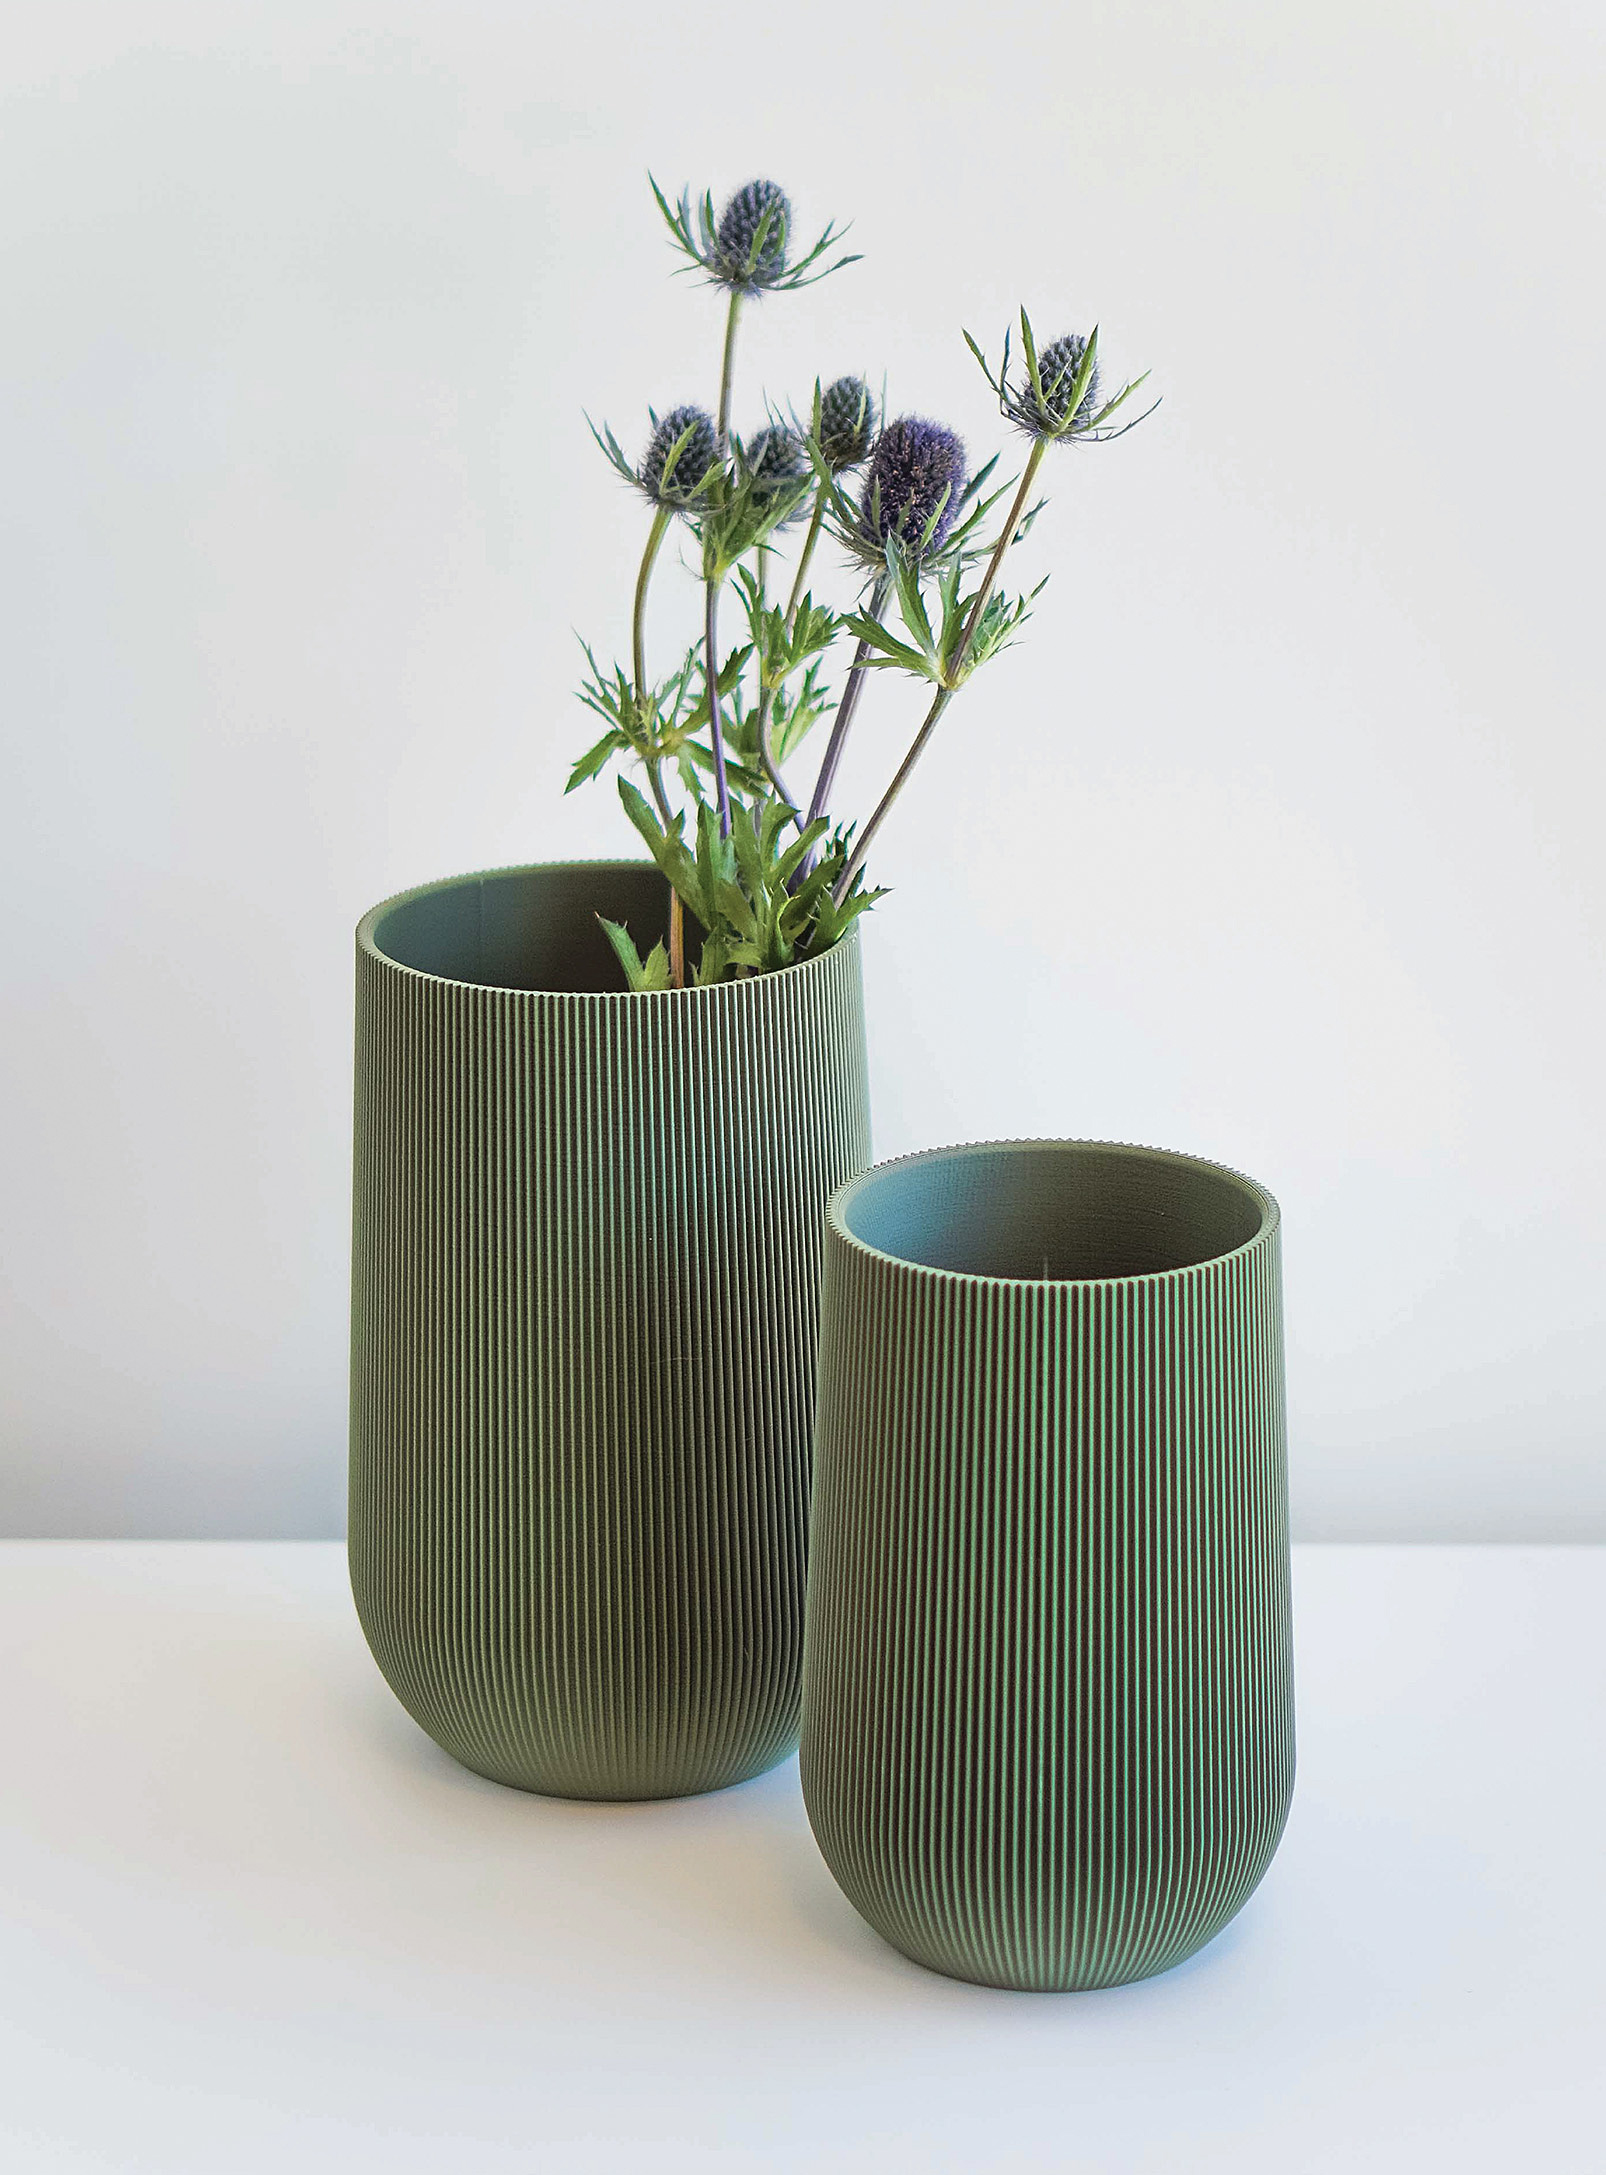 Conifer Homewares Sequoia Plant-based Vase See Available Sizes In Mossy Green